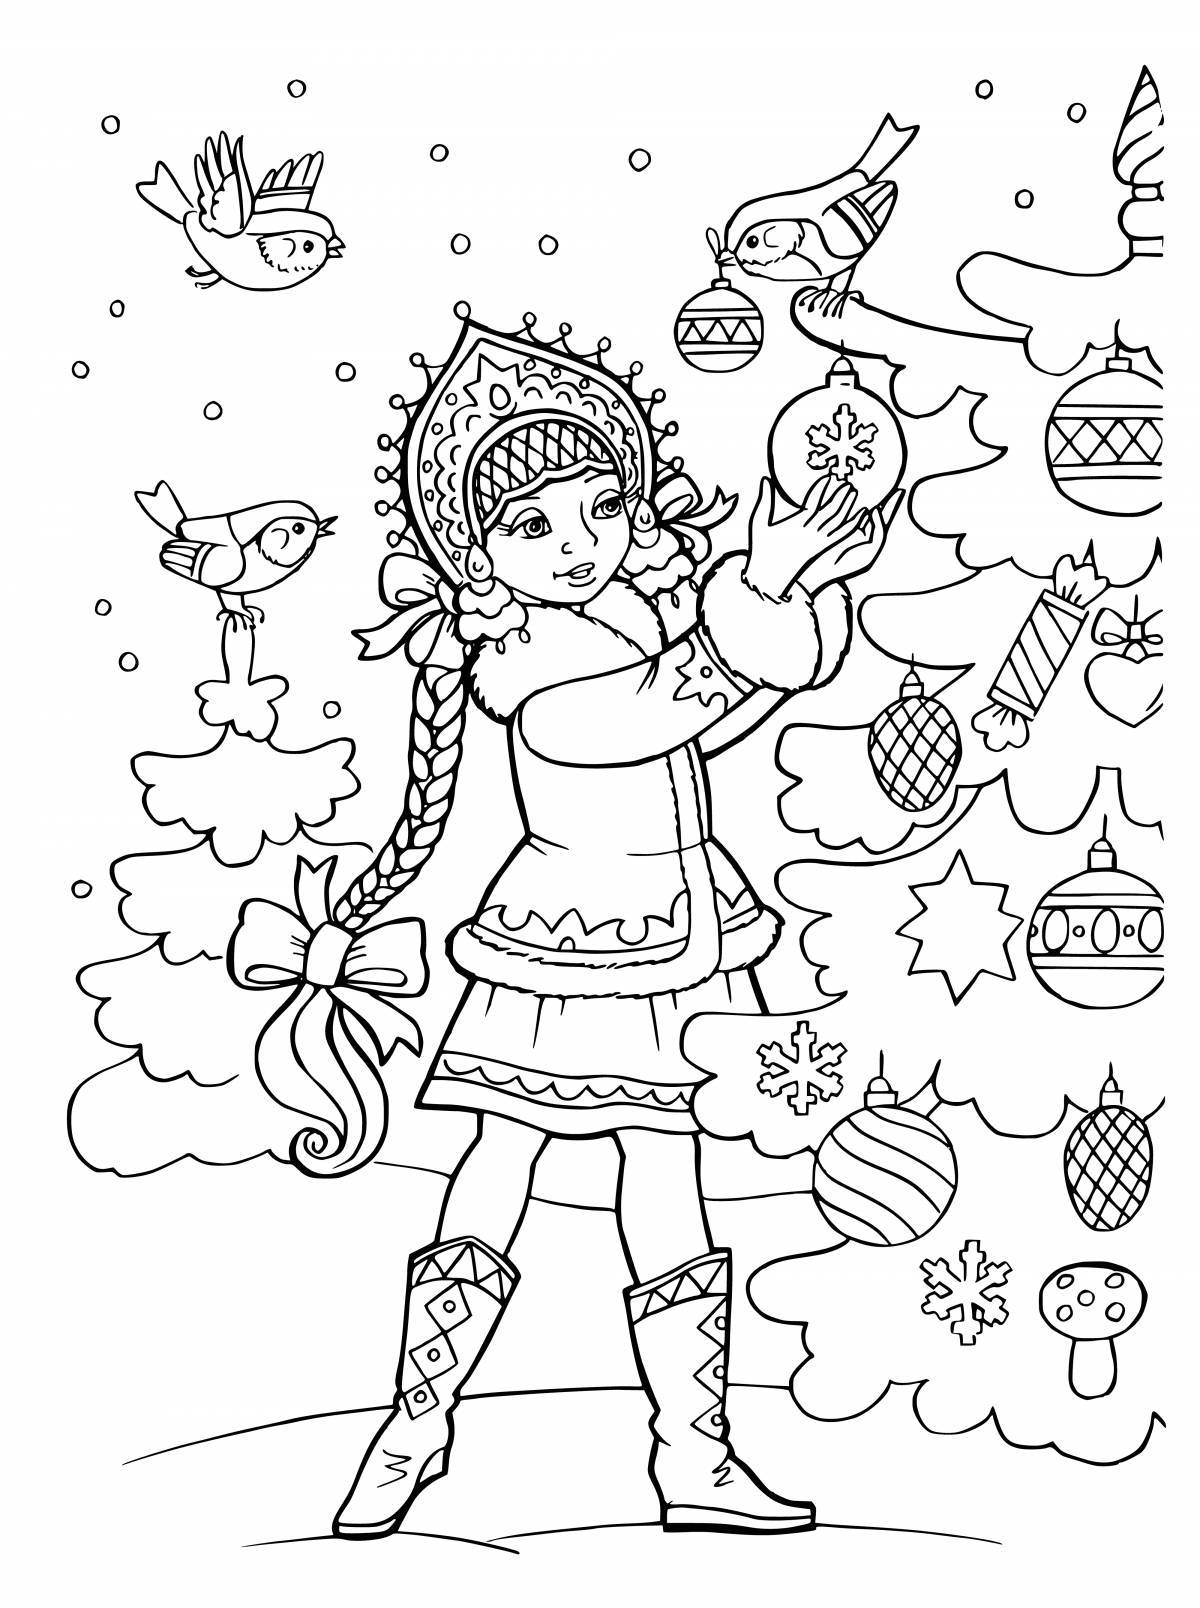 Merry Christmas coloring book for kids